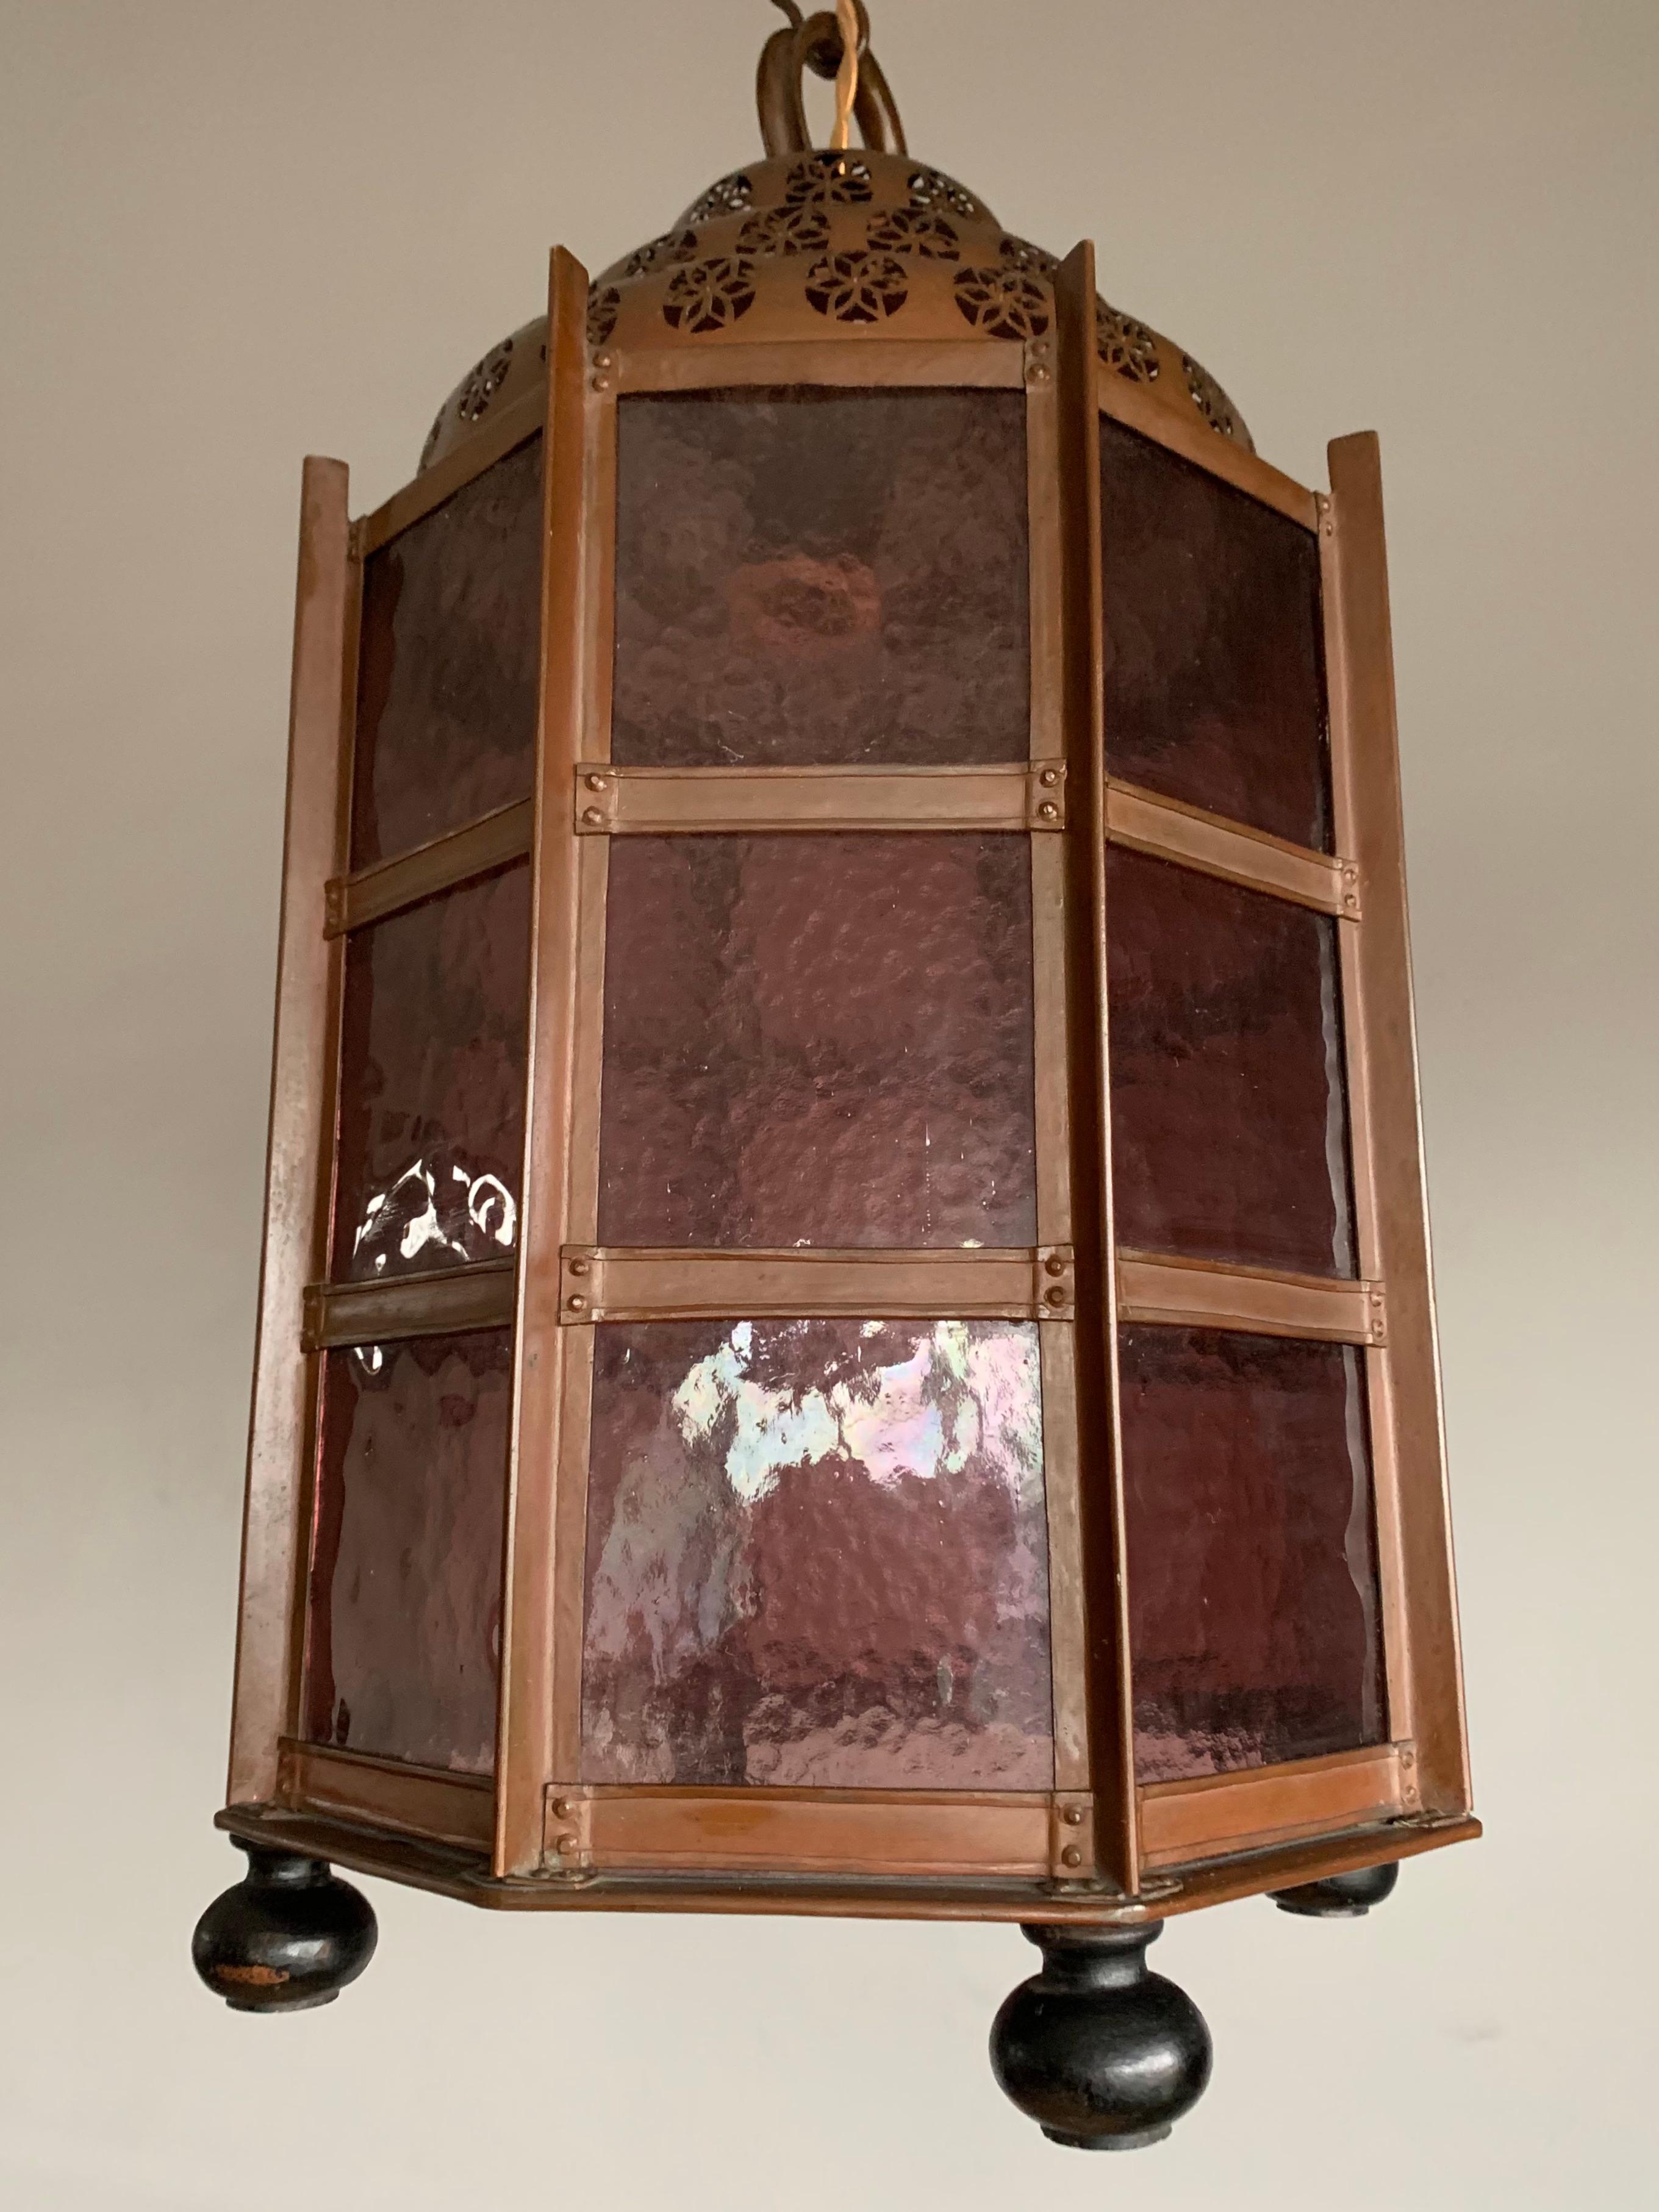 European Arts and Crafts Copper Pendant Light or large Hall Lantern with Cathedral Glass